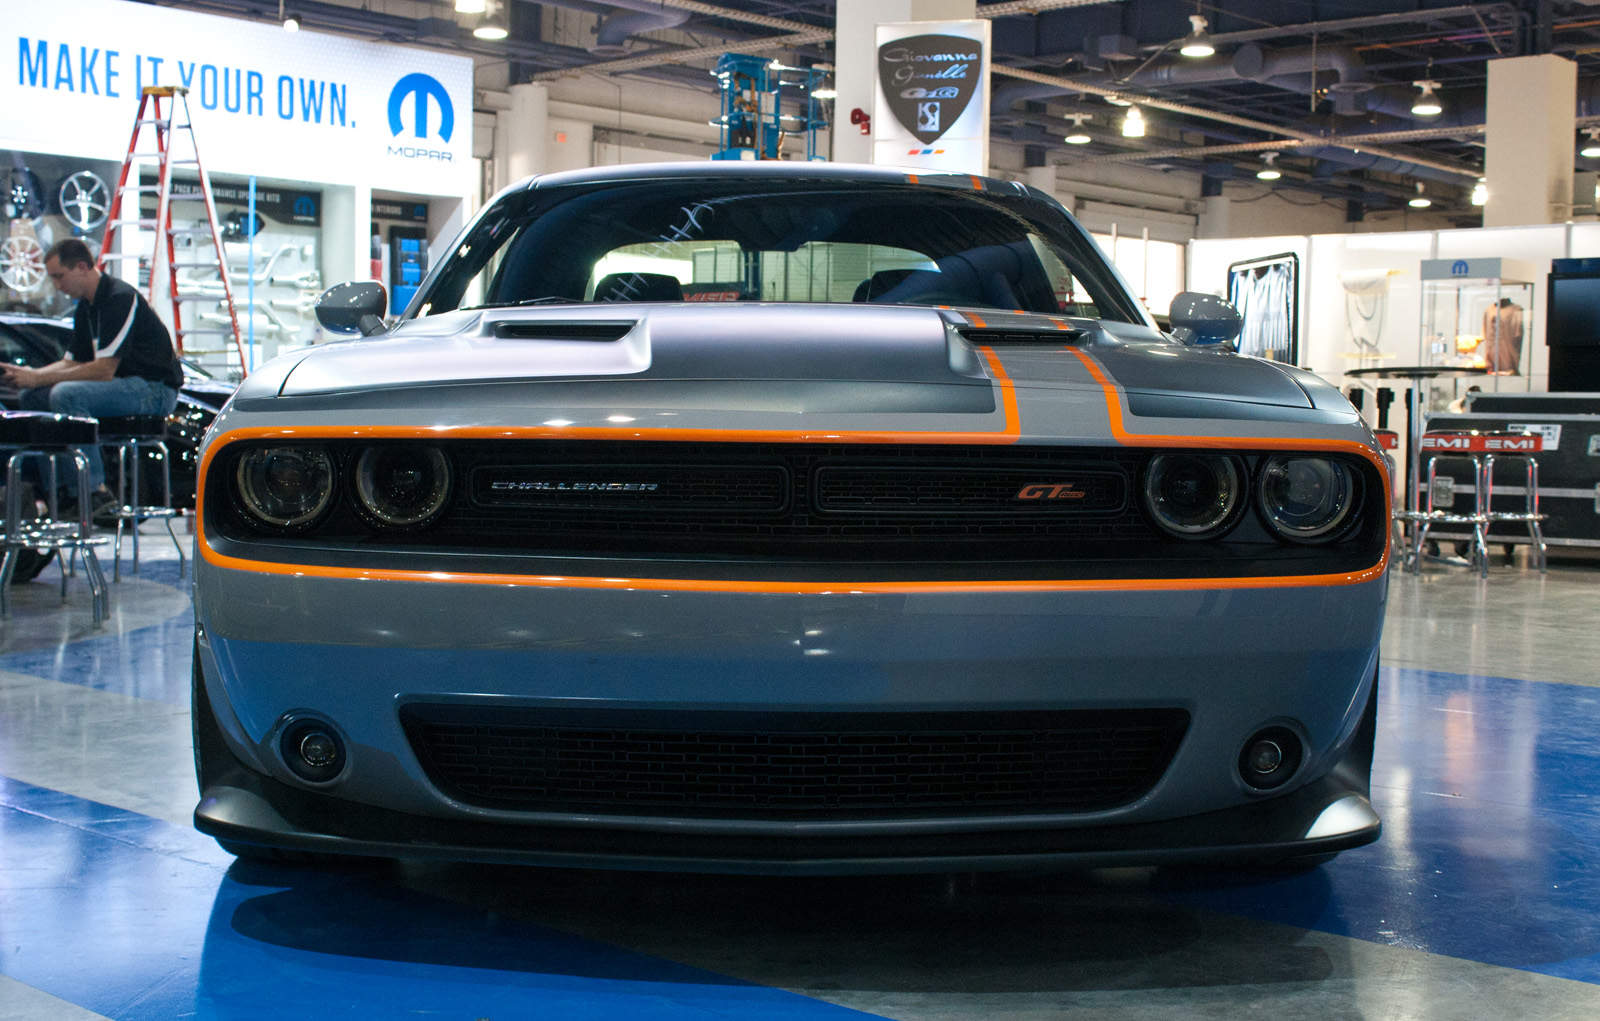 HQ Dodge Challenger GT AWD Wallpapers | File 502.91Kb